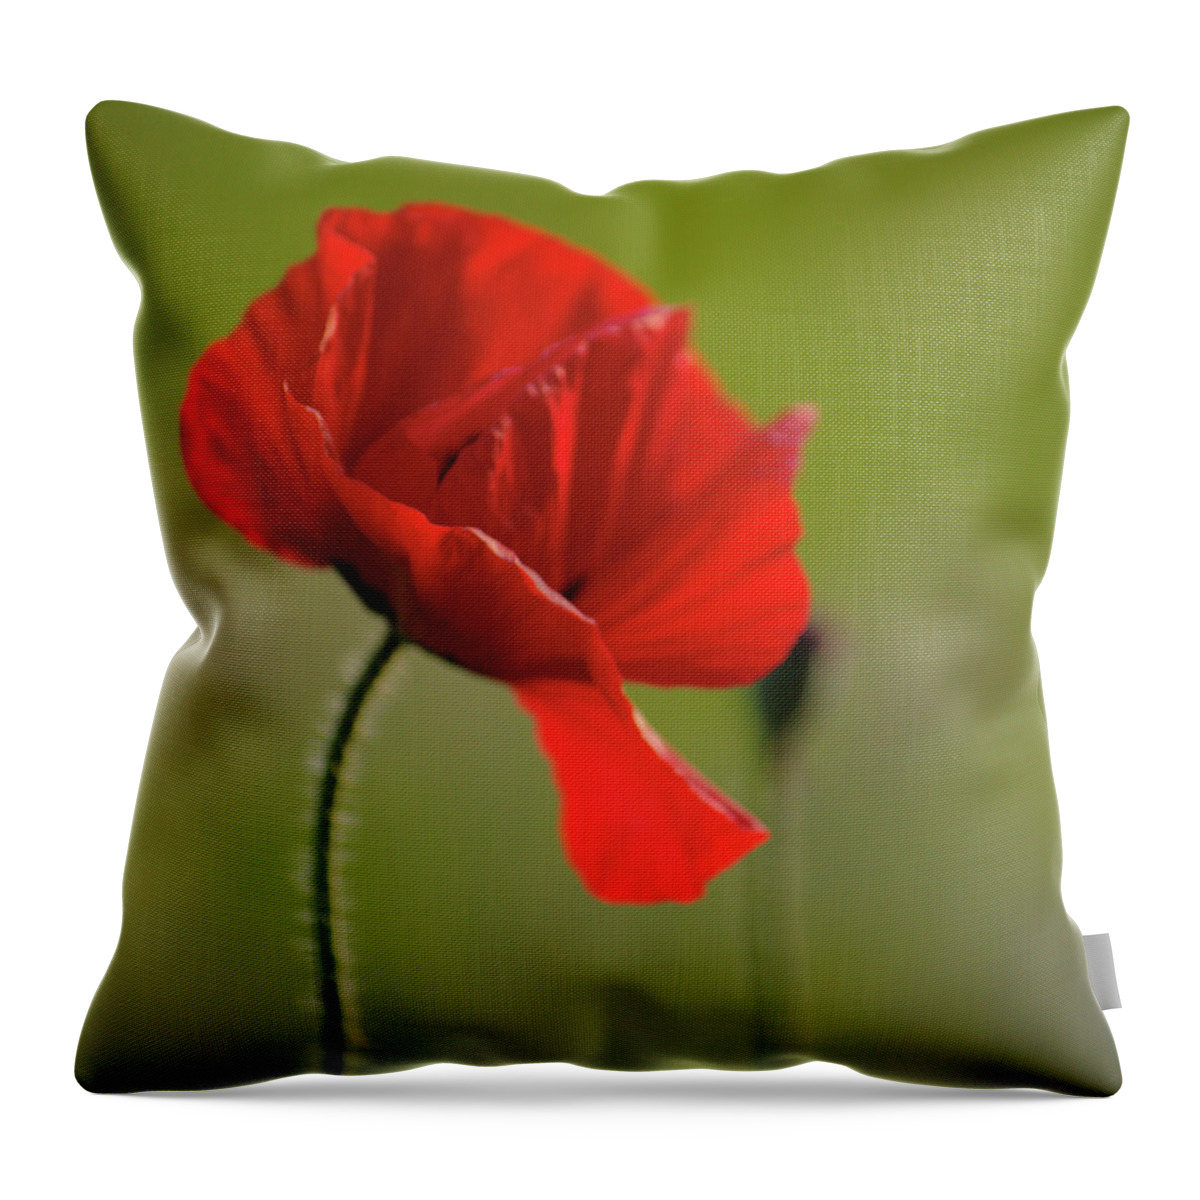 Windswept Throw Pillow featuring the photograph Windswept Poppy by Adrian Wale